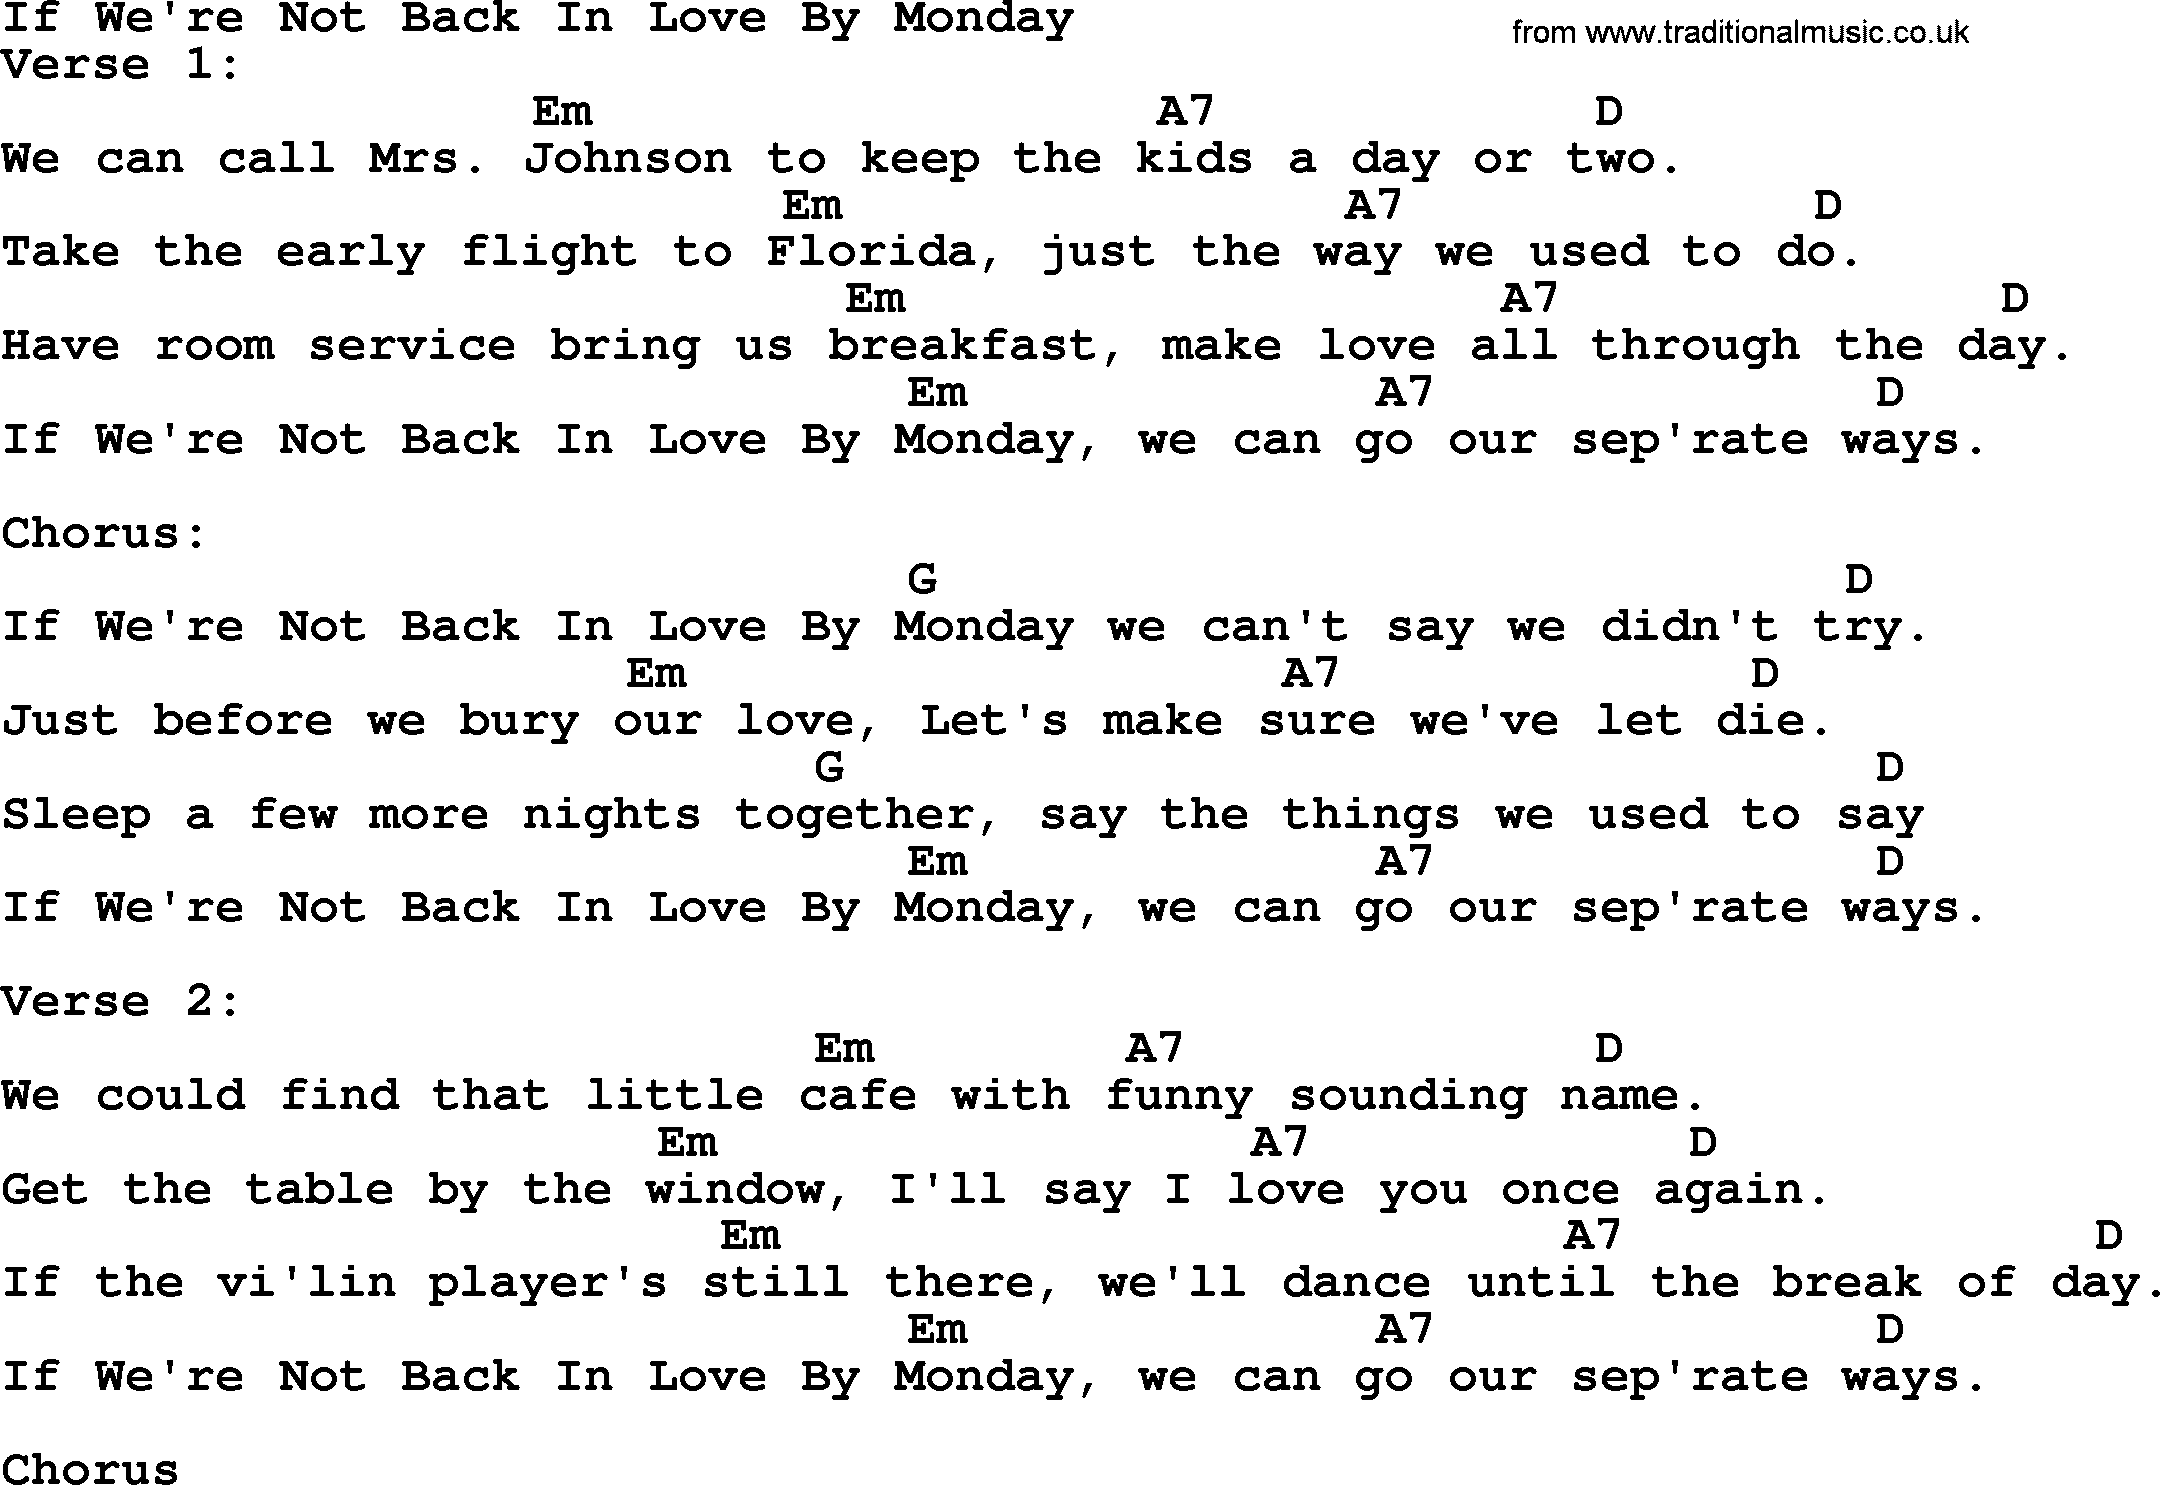 Merle Haggard song: If We're Not Back In Love By Monday, lyrics and chords